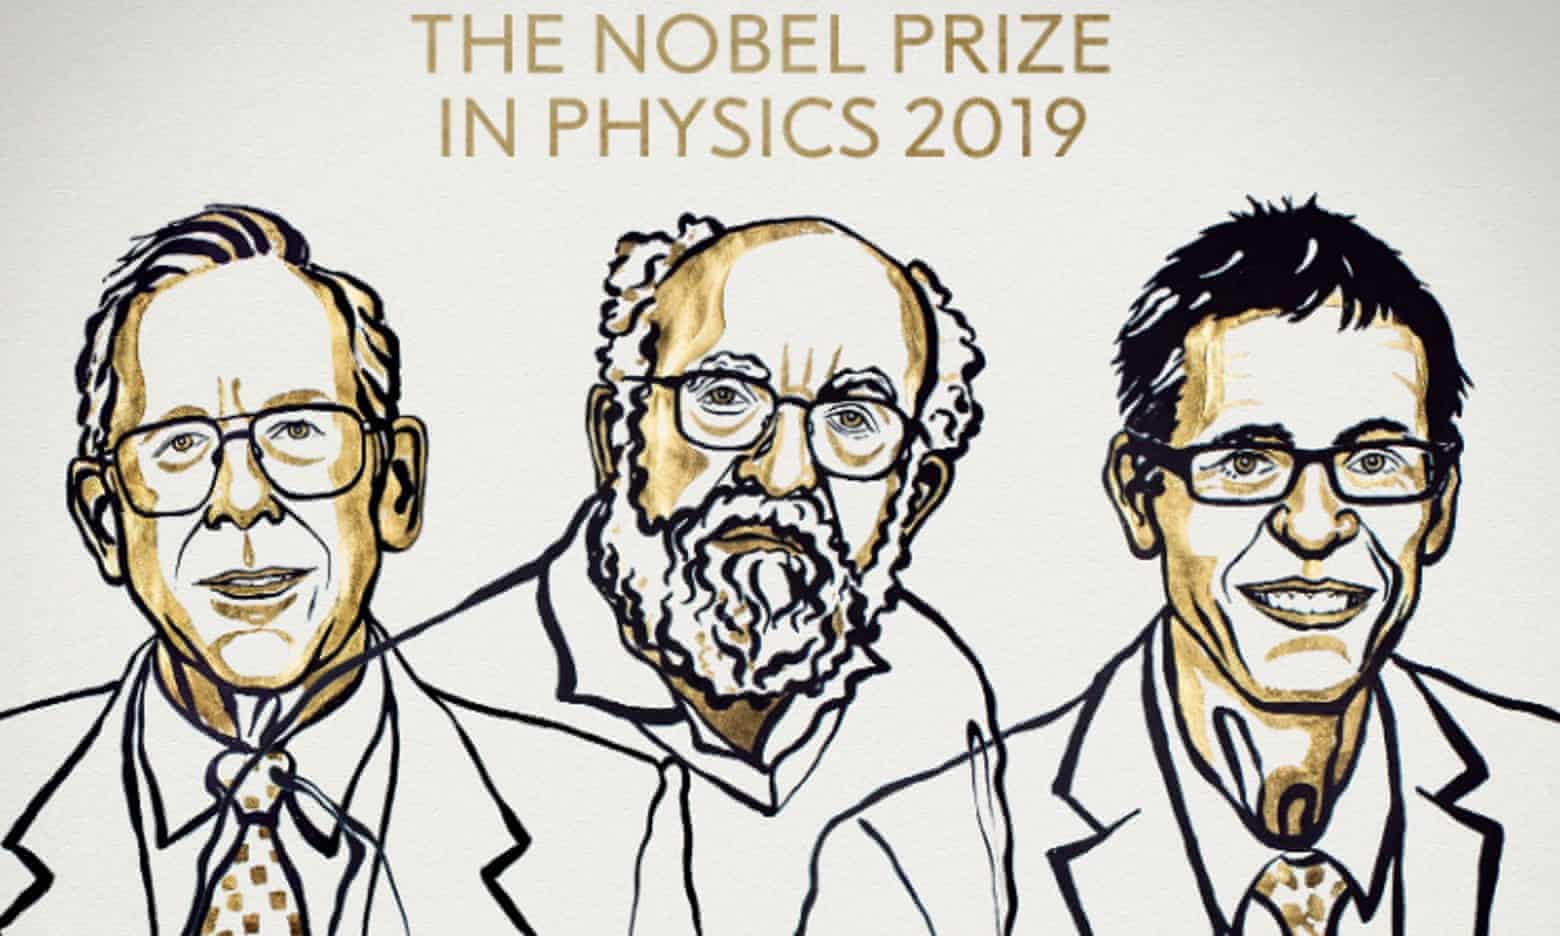 James Peebles, Michel Mayor and Didier Queloz have received the 2019 Nobel prize in physics Photograph: Niklas Elmehed/Royal Swedish Academy of Sciences